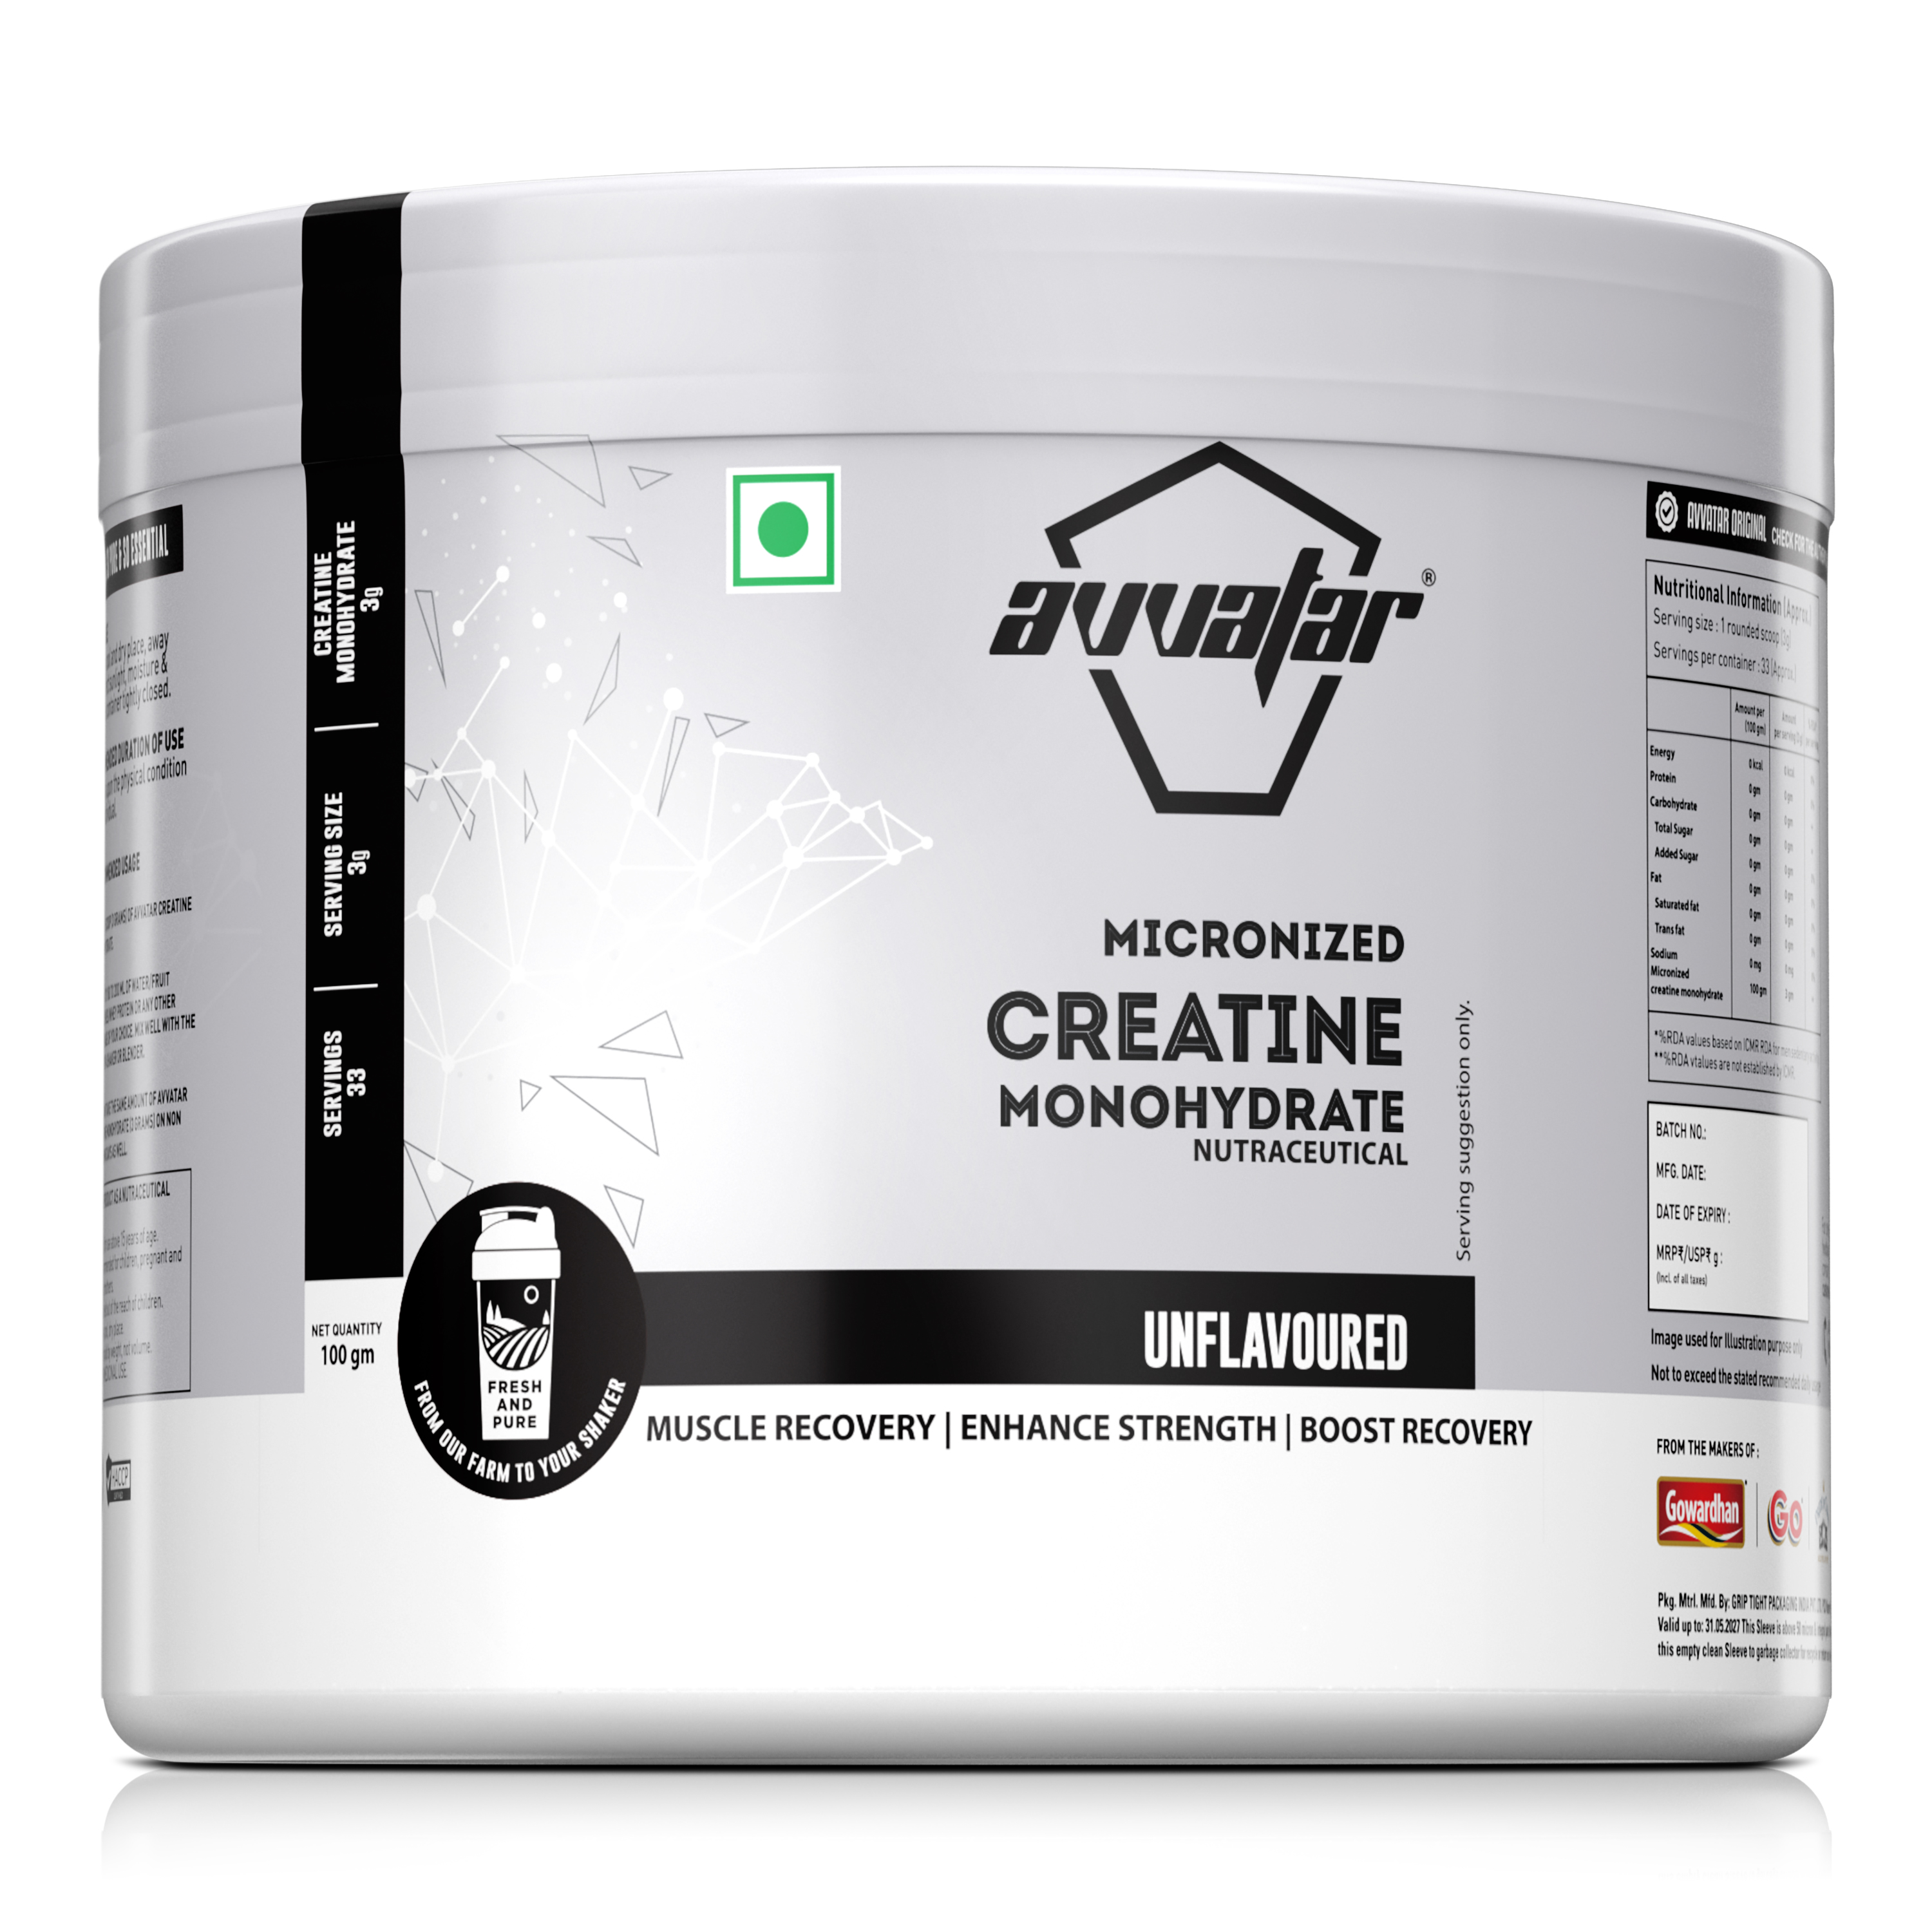 Micronised for Rapid Absorption: Our creatine monohydrate is finely micronized, ensuring quick absorption and maximum effectiveness.
33 Servings per Container: Each 100g container provides a total of 33 servings, offering excellent value for your muscle-building needs.
Pure and Potent: Avvatar Creatine Monohydrate is of the highest quality, free from fillers and additives, supporting your fitness goals without compromise.
Enhanced Strength and Endurance: Fuel your workouts with the power of creatine, promoting increased strength, endurance, and overall athletic performance
Versatile Use: Suitable for various fitness goals, including muscle building, strength training, and high-intensity workouts.
Easy to Mix: Our micronized powder dissolves easily in water or your favorite beverage, making it convenient to incorporate into your daily routine.
Lab Tested for Purity: Avvatar products undergo rigorous testing to ensure the highest standards of purity and quality.